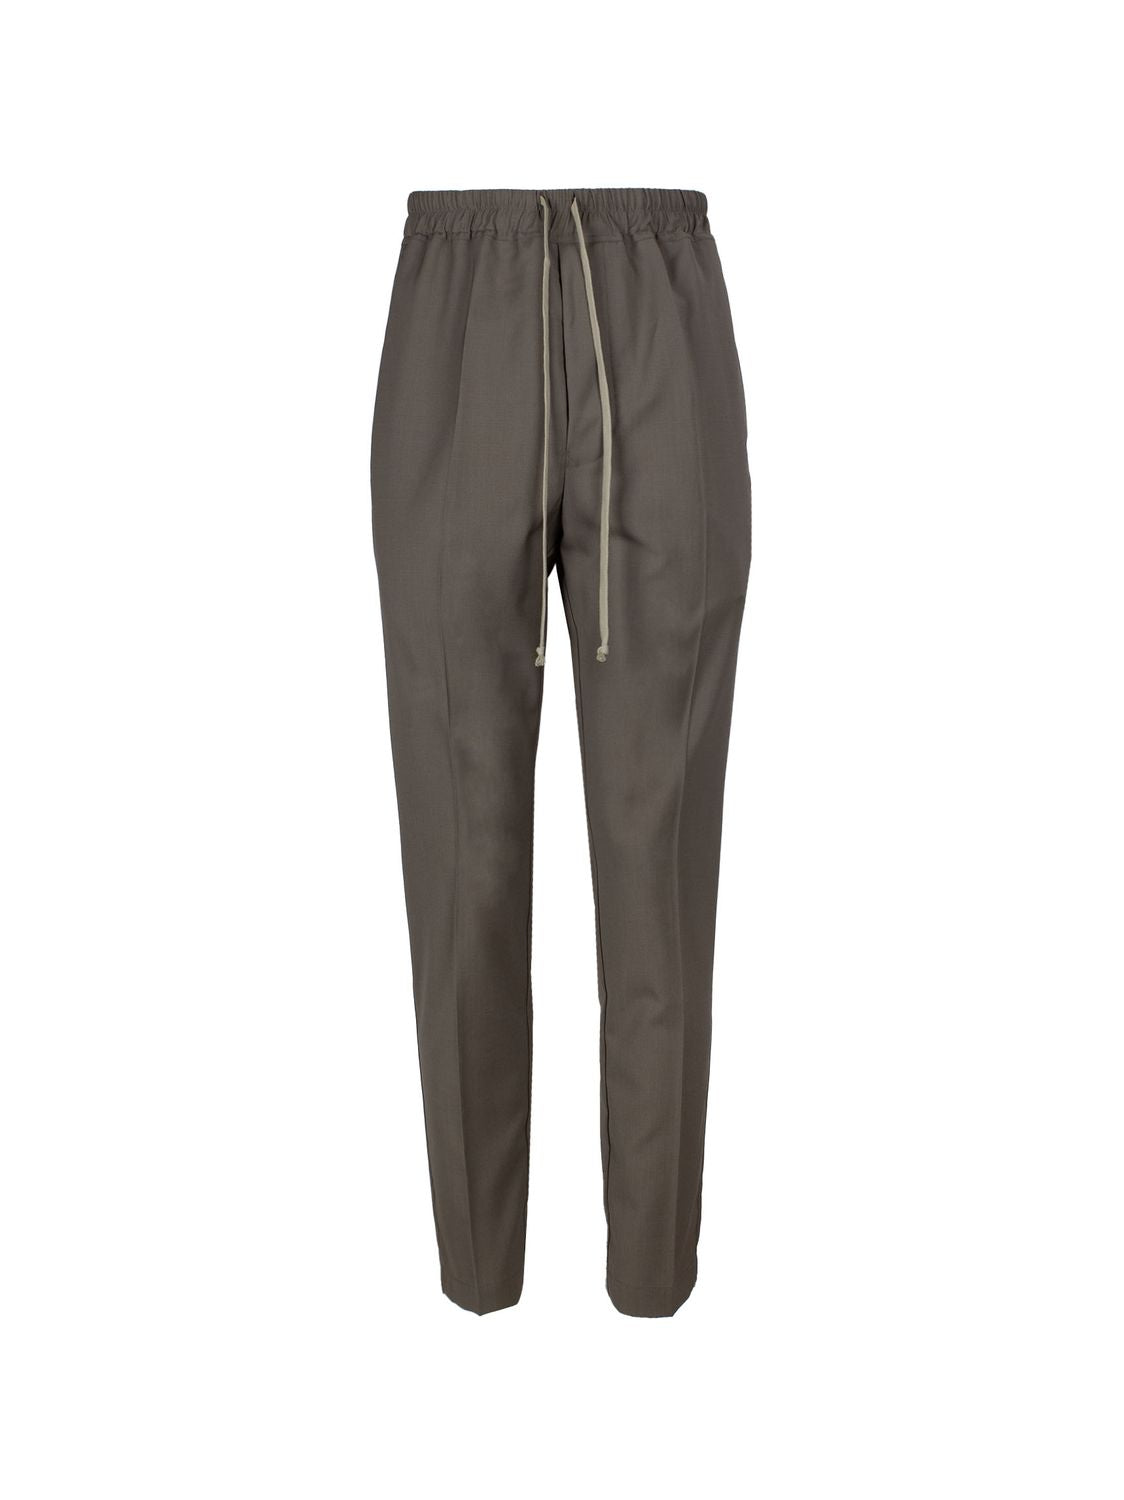 Rick Owens Men's Taupe Grey Straight-leg Drawstring Trousers With Pressed Crease In Gray